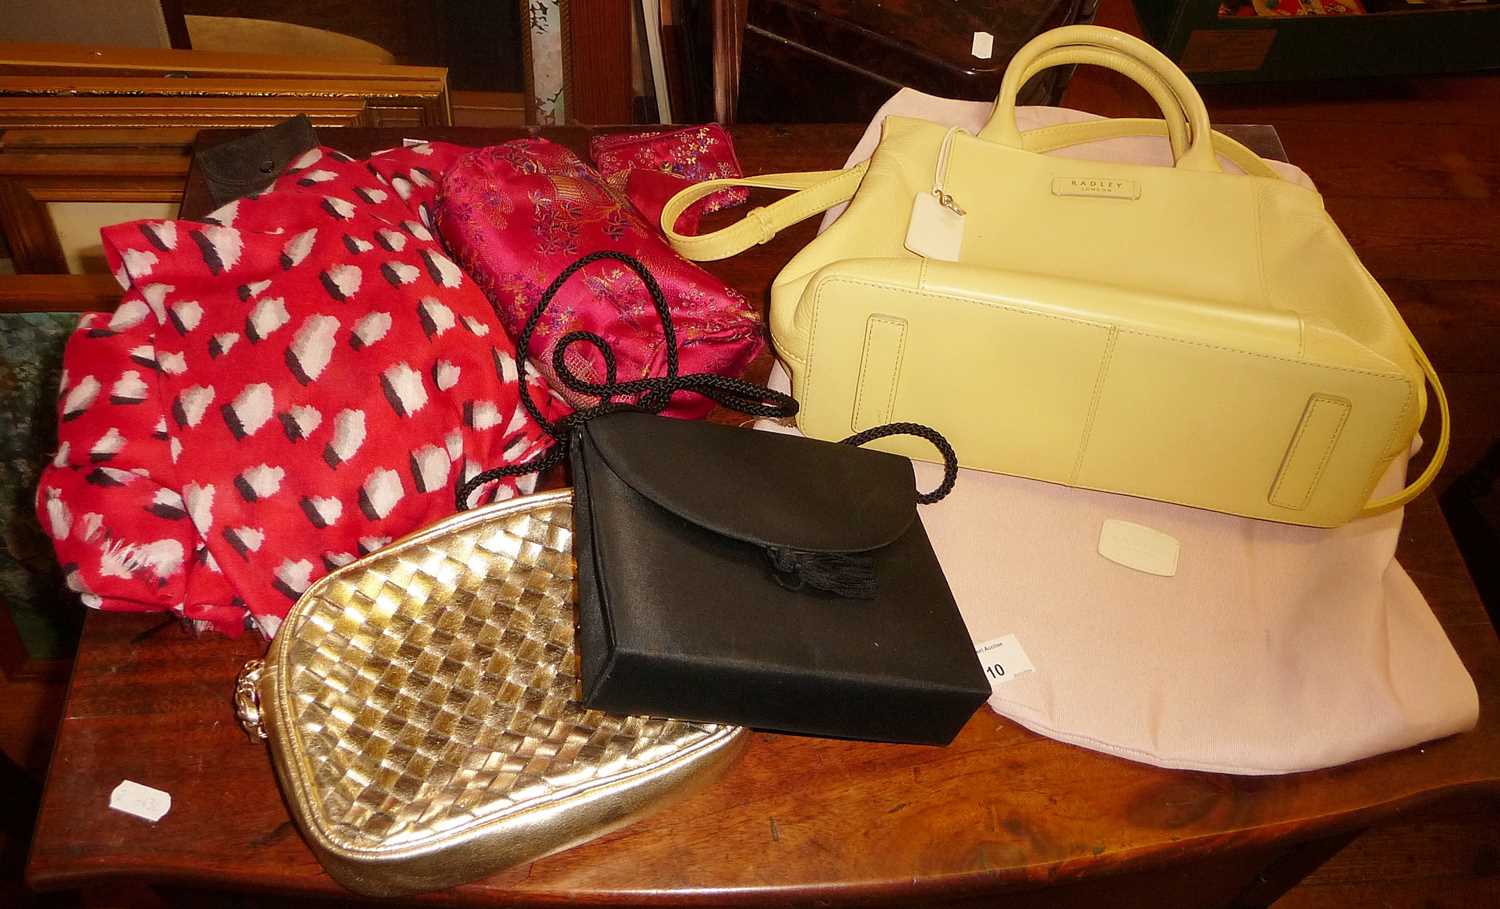 Vintage clothing - a Radley of London yellow leather handbag, three clutch bags and a scarf - Image 2 of 2